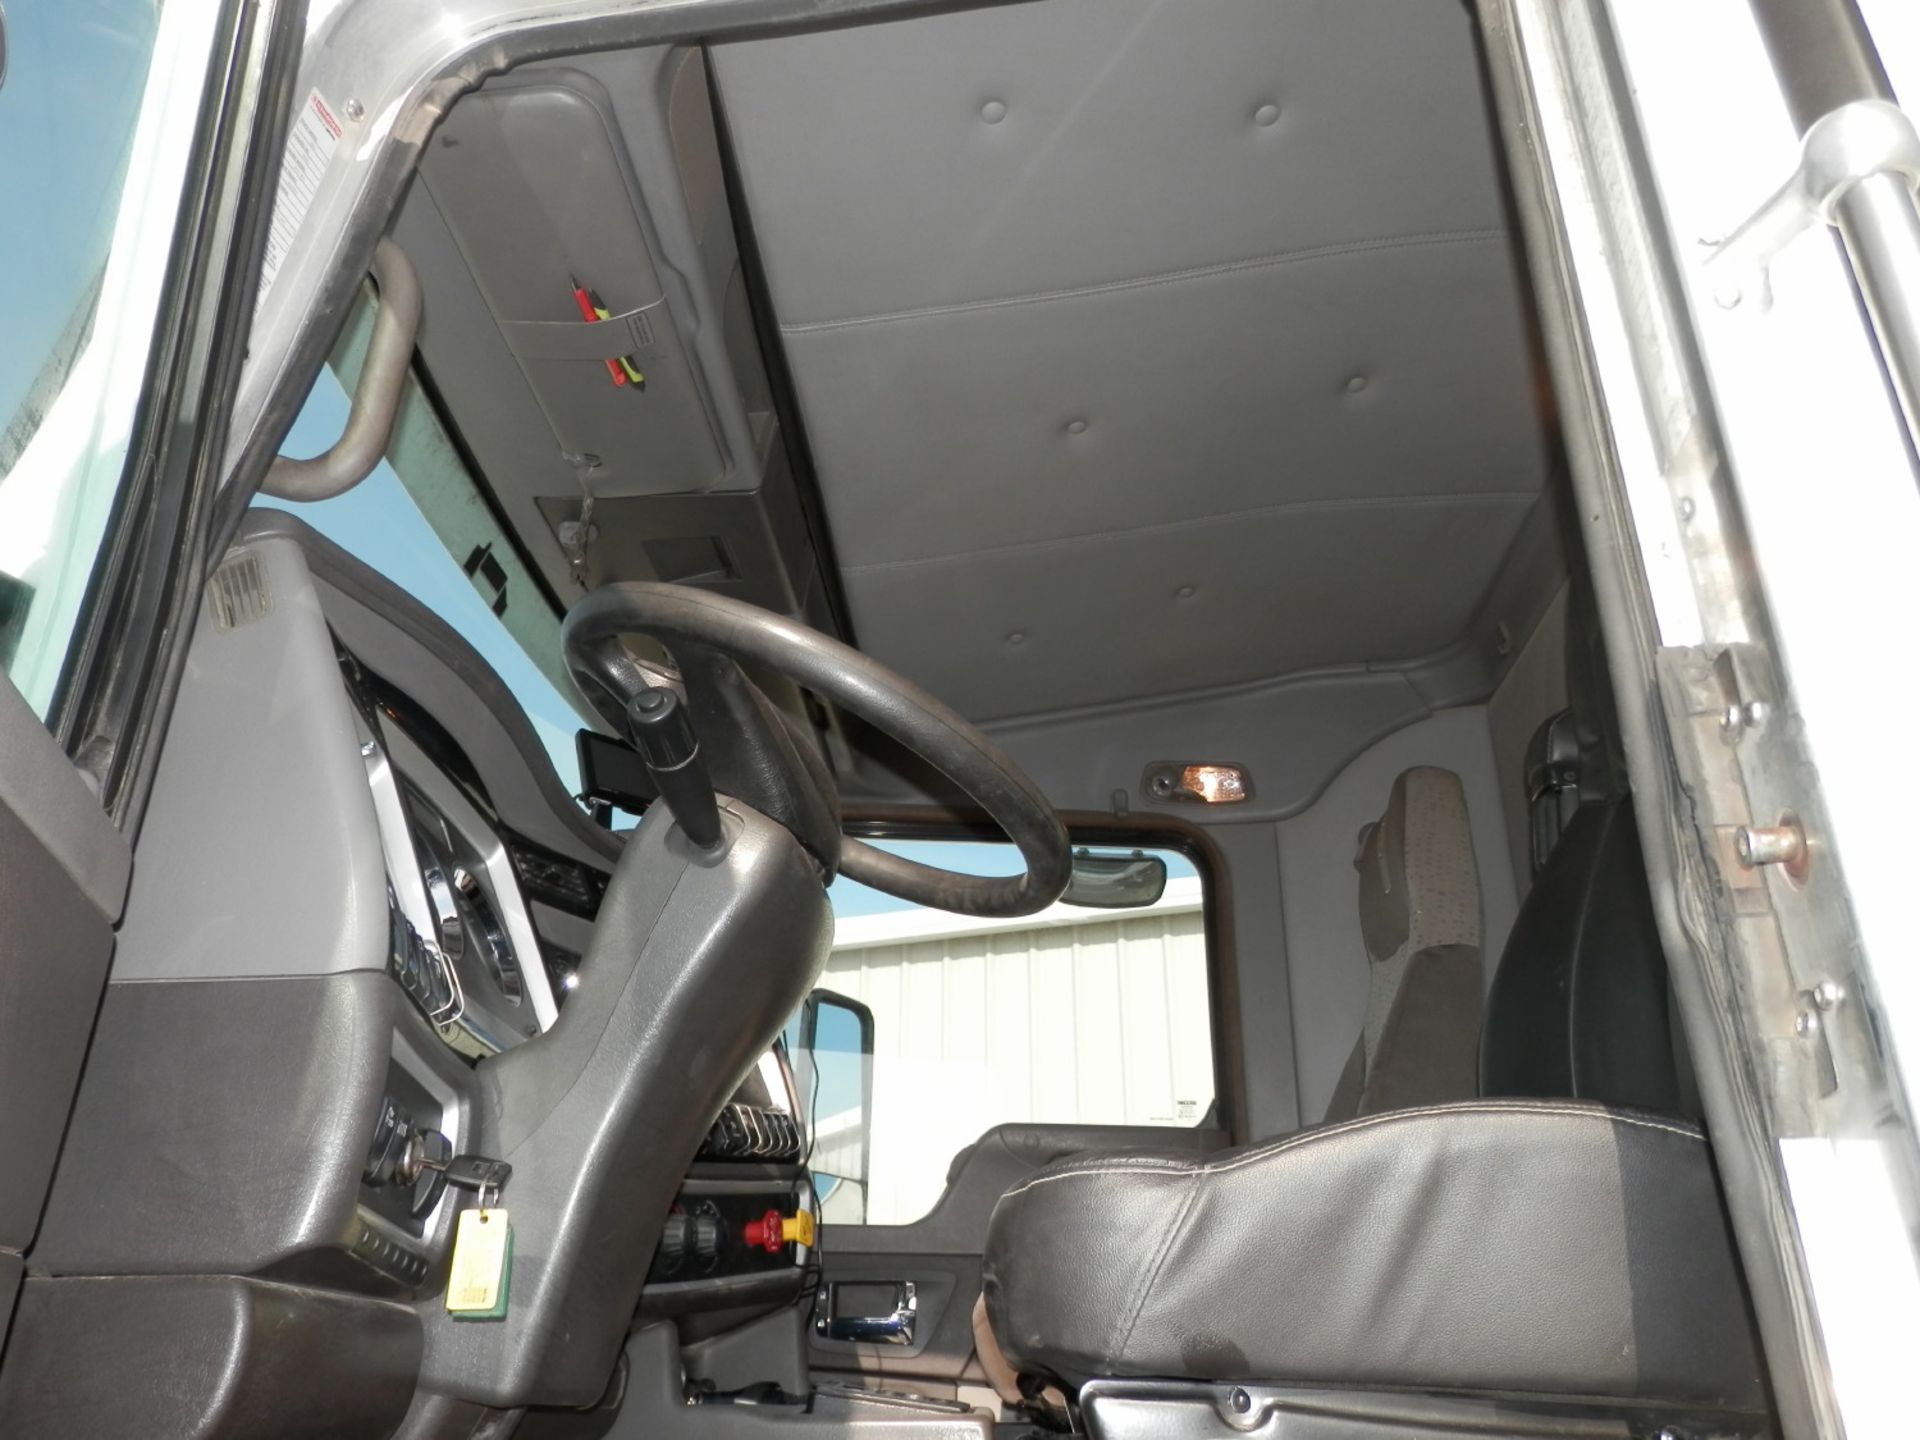 2013 KENWORTH T800 DAY CAB SEMI TRACTOR -(TRUCK #16) - Image 8 of 20